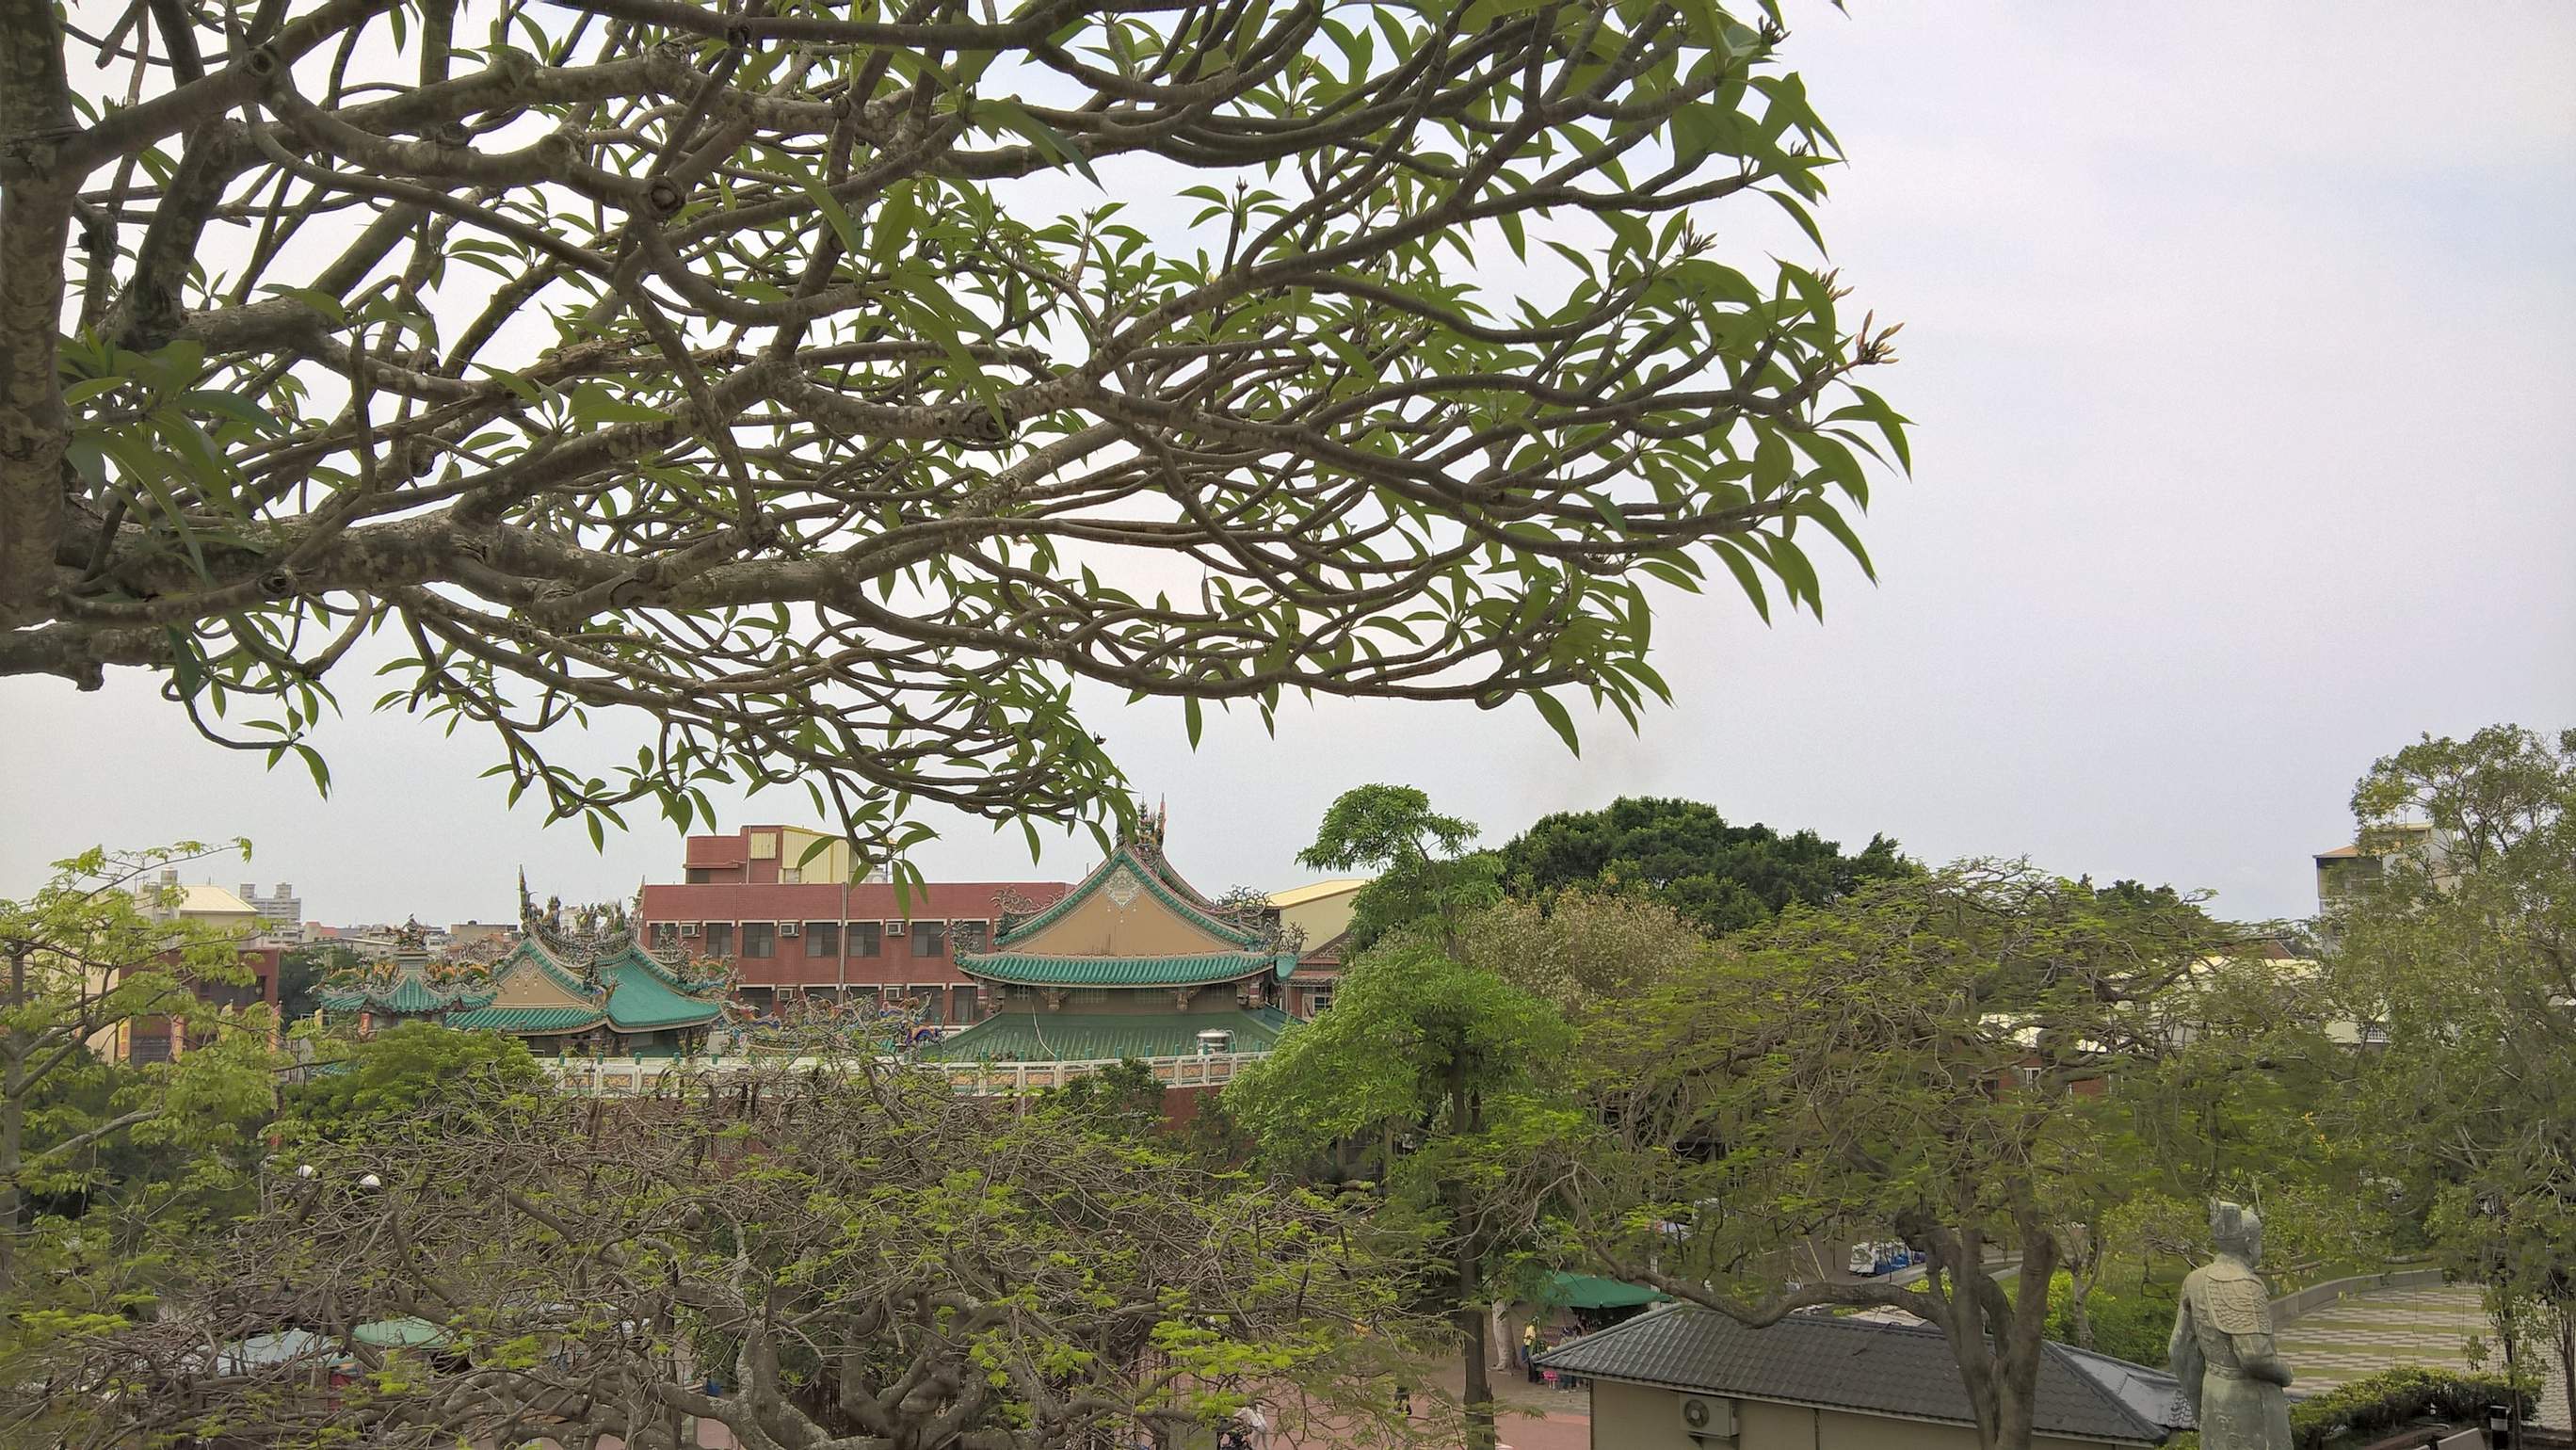 Anping Old Fort (a.k.a. Fort Zeelandia) was a fortress built over ten years from 1624 to 1634 by the Dutch East India Company in Tainan City, Taiwan.